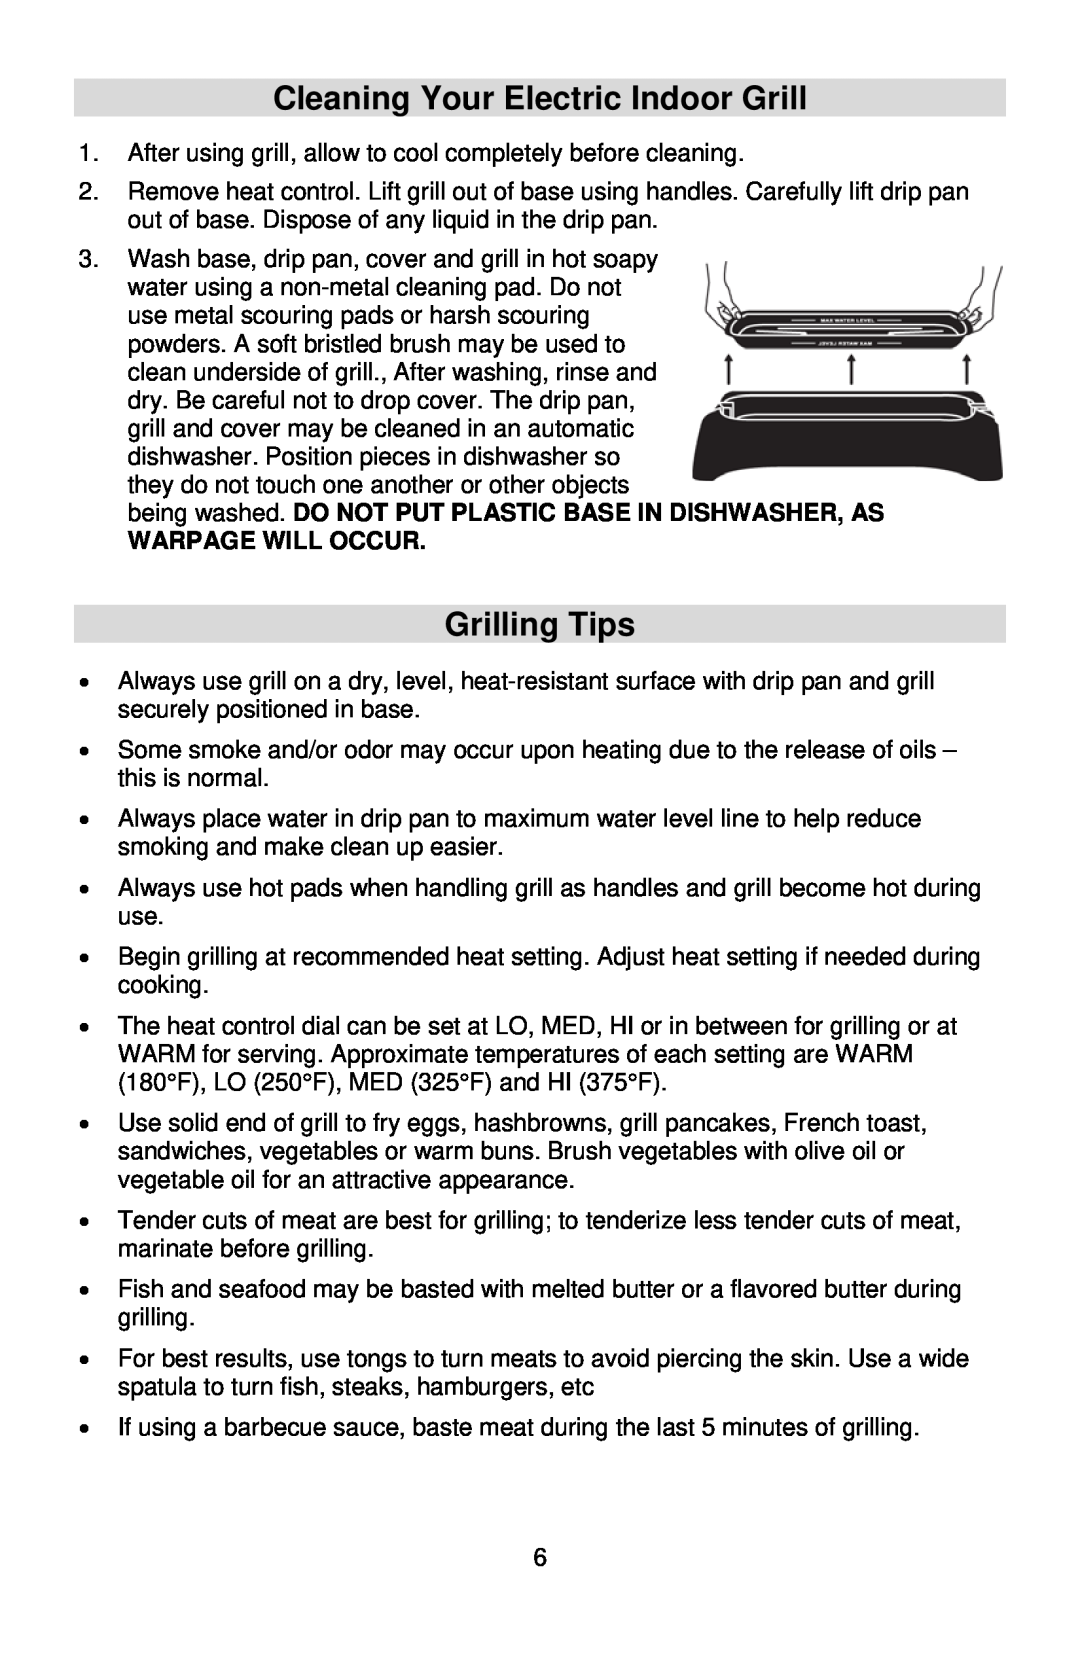 West Bend instruction manual Cleaning Your Electric Indoor Grill, Grilling Tips, Warpage Will Occur 